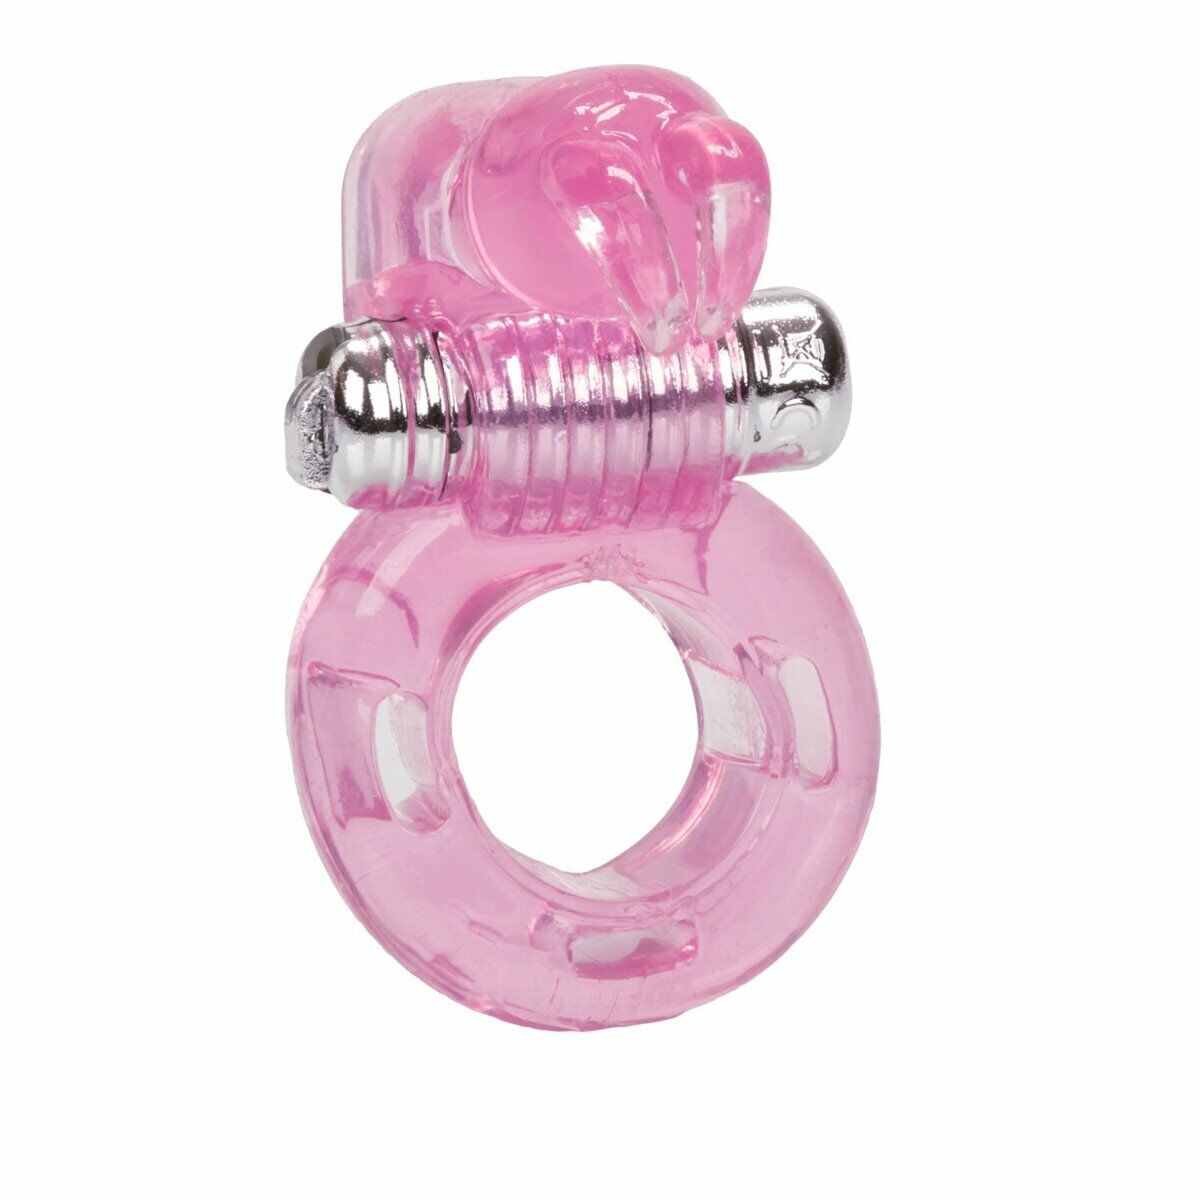 Basic Essentials Butterfly Enhancer Vibrating Penis Cock Ring Reusable Sex Toy